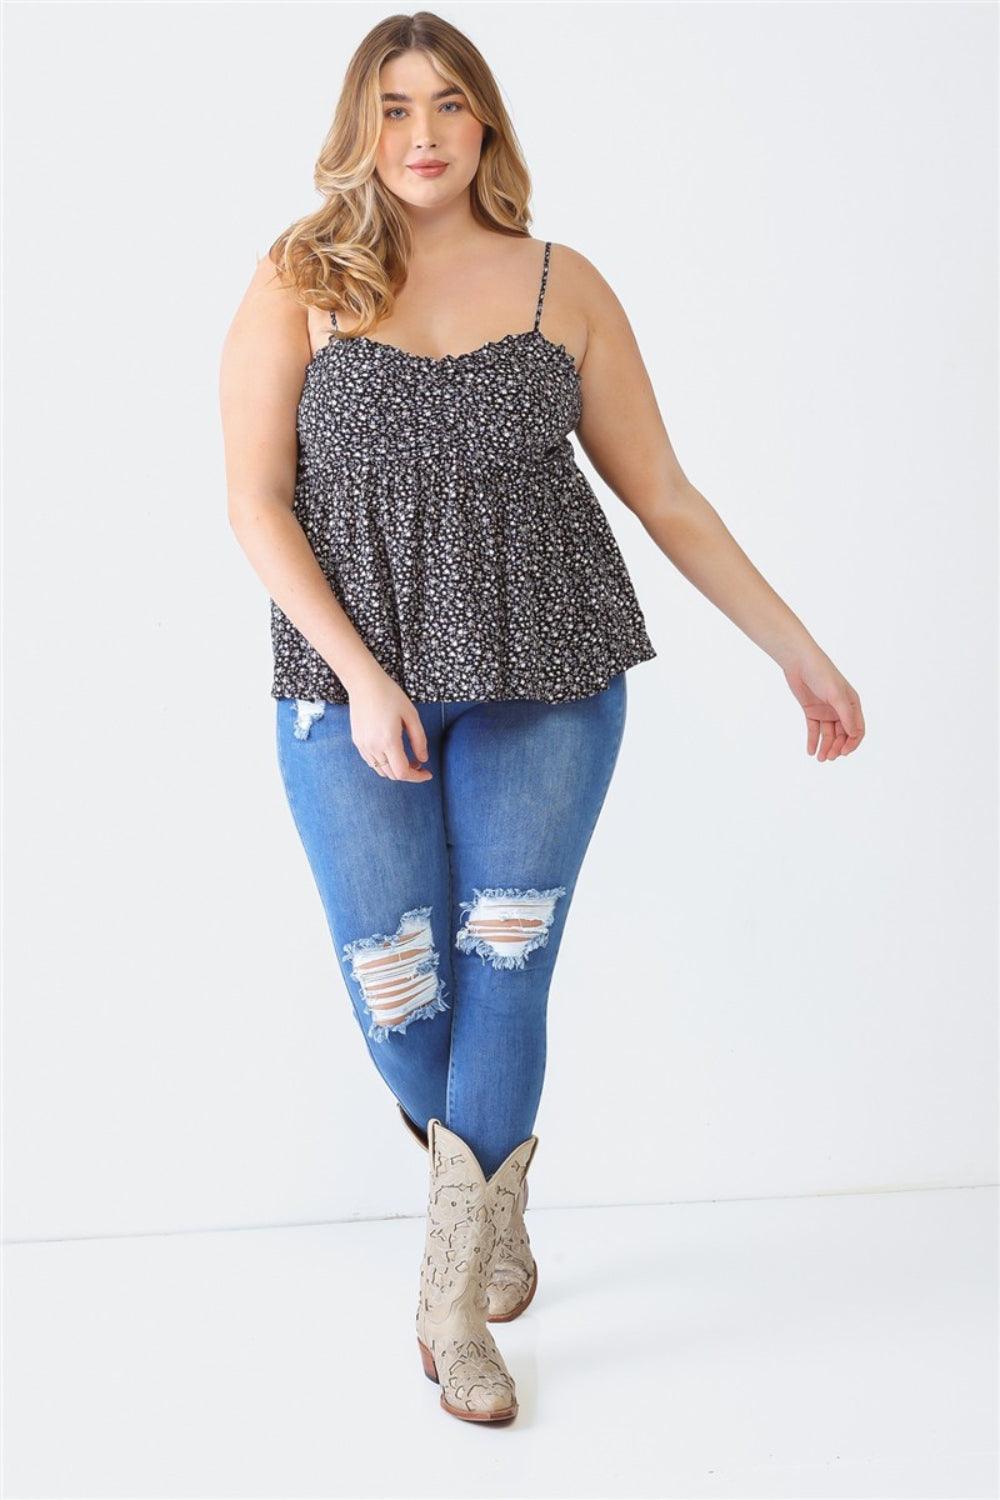 Zenobia Plus Size Frill Smocked Floral Sweetheart Neck Cami - Anchored Feather Boutique